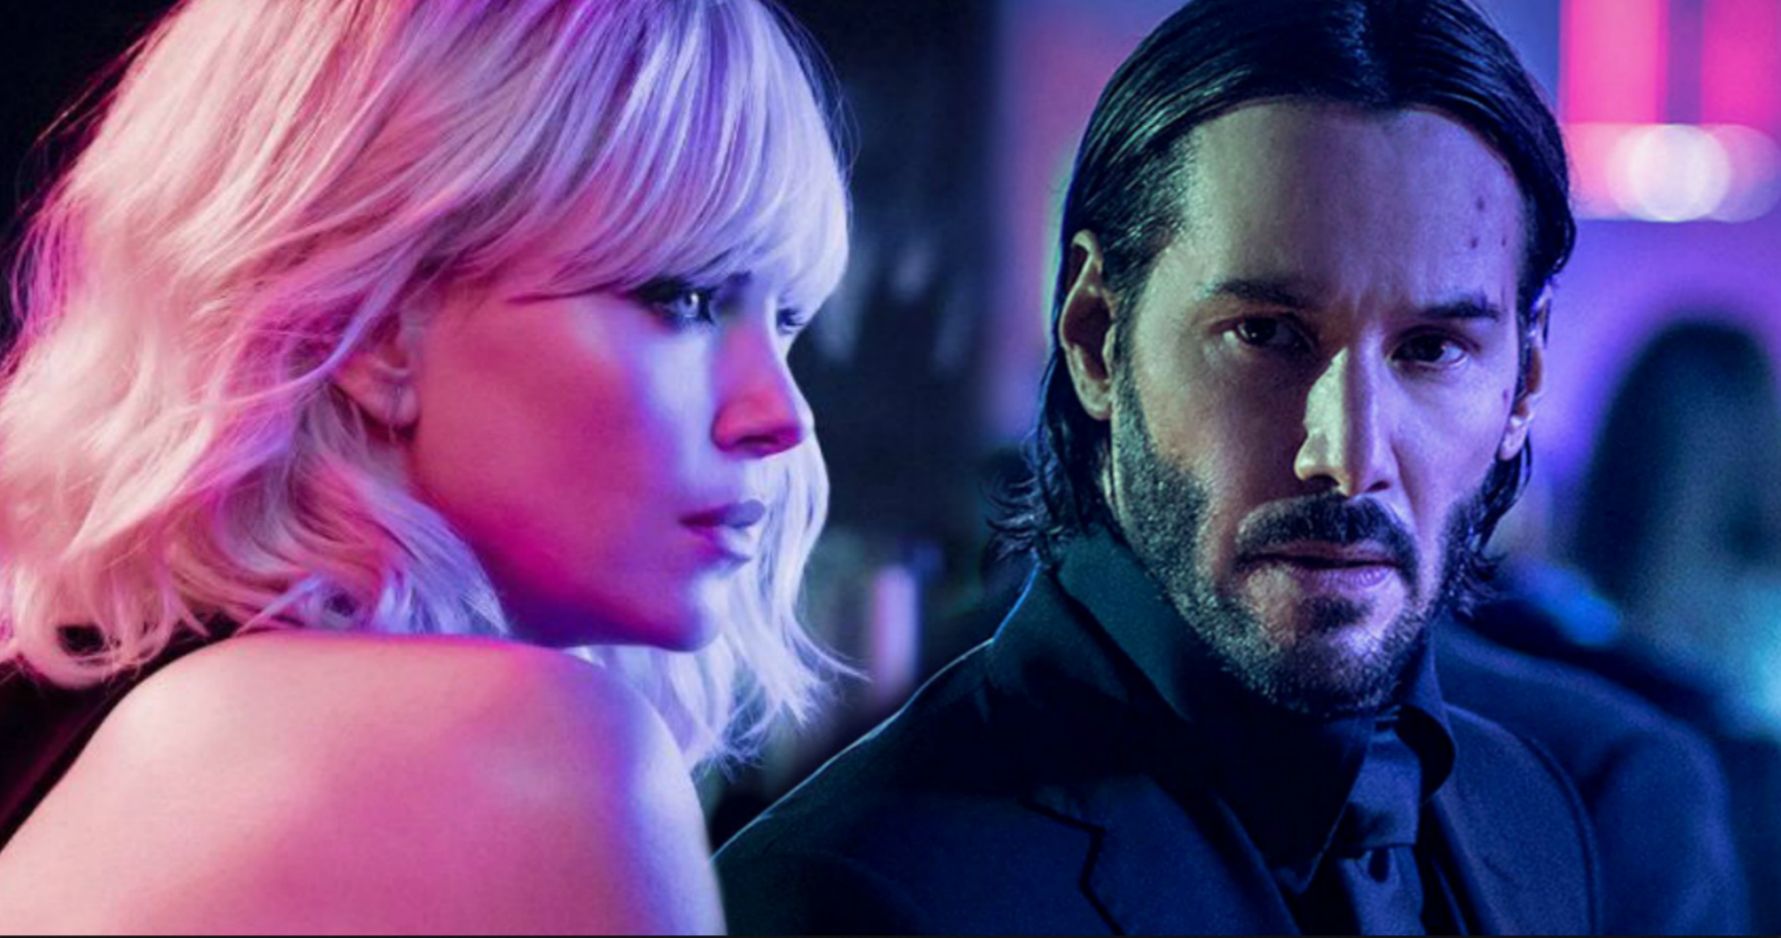 Charlize Theron Is All About an Atomic Blonde Meets John Wick Crossover